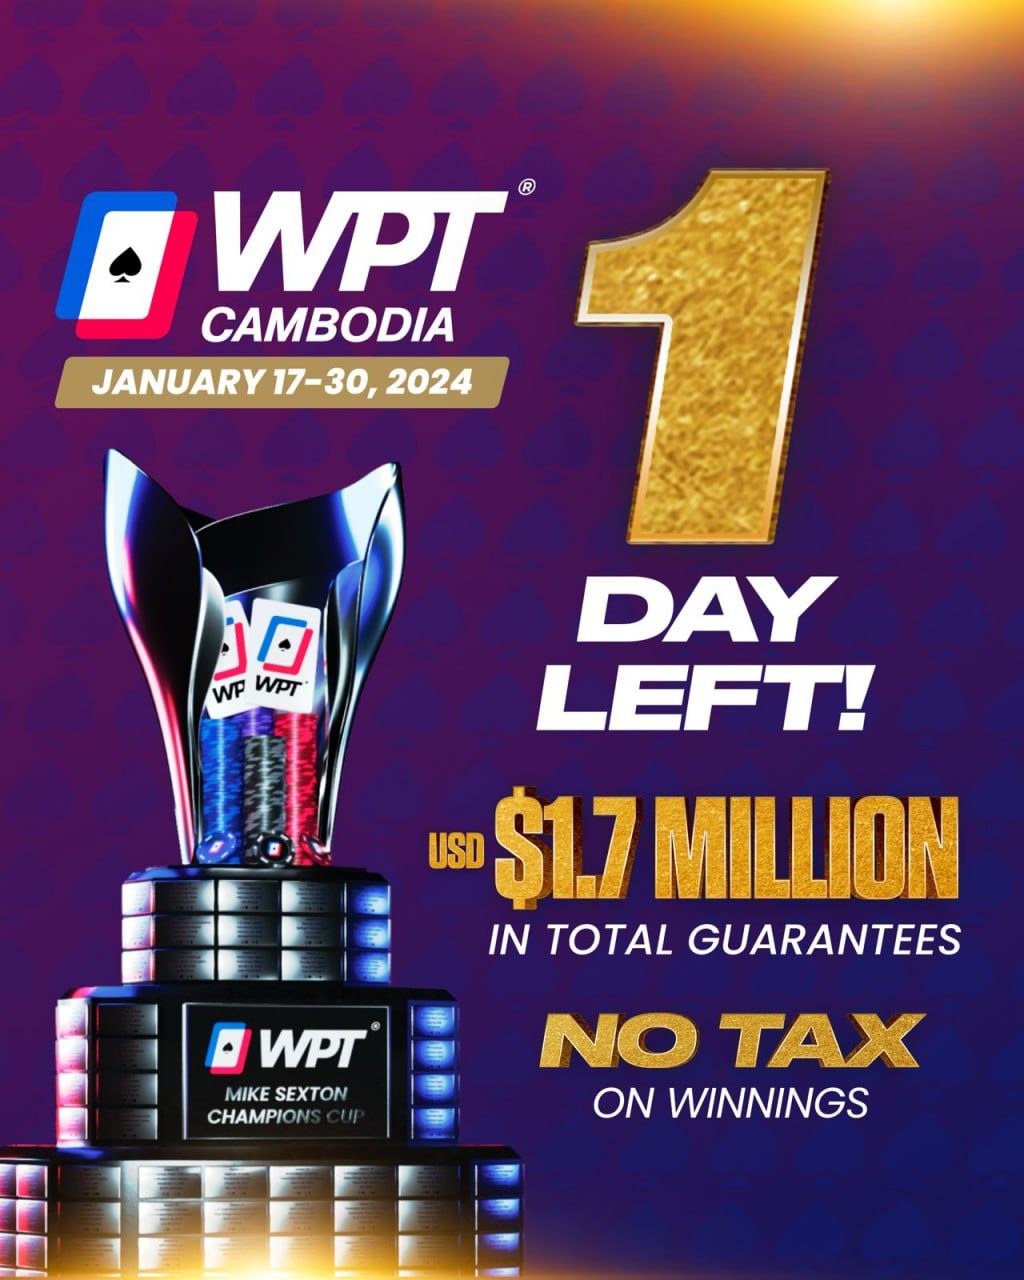 One day away from WPT Cambodia - first Main Tour in Southeast Asia - January 17 to 30, 2024 in Phnom Penh